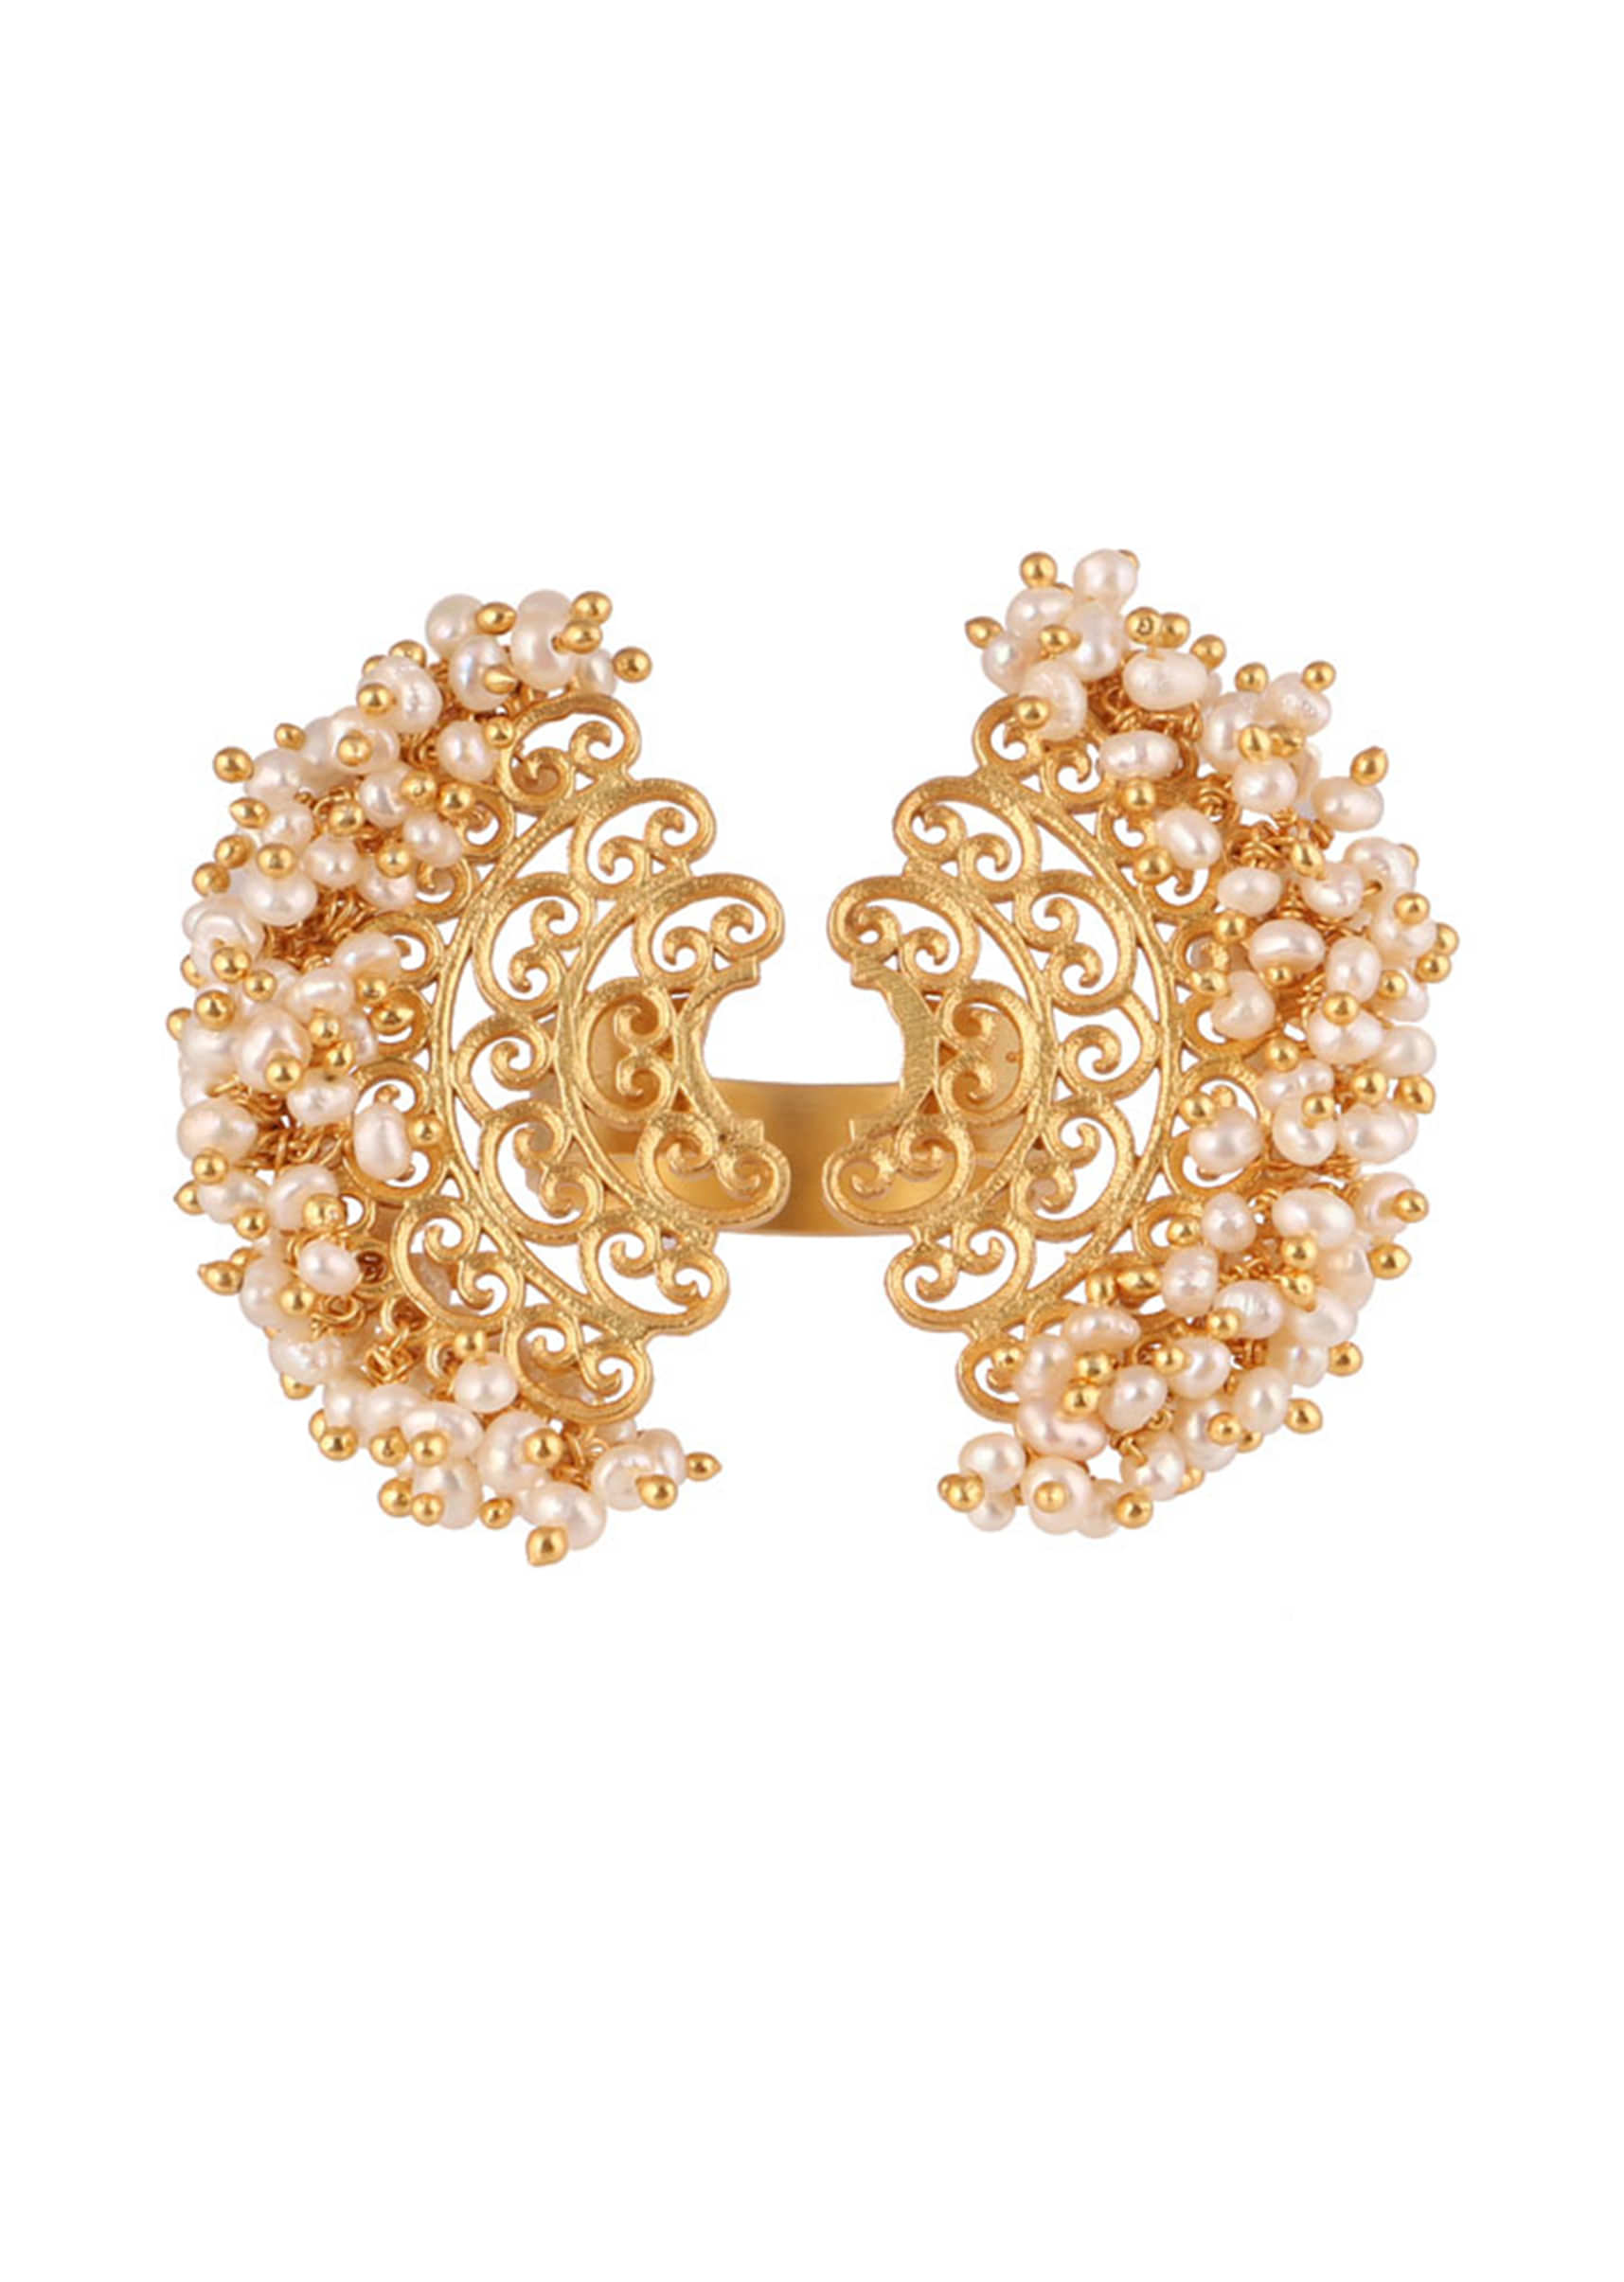 Gold Plated Cocktail Ring With Filigree Details And Pearls By Zariin